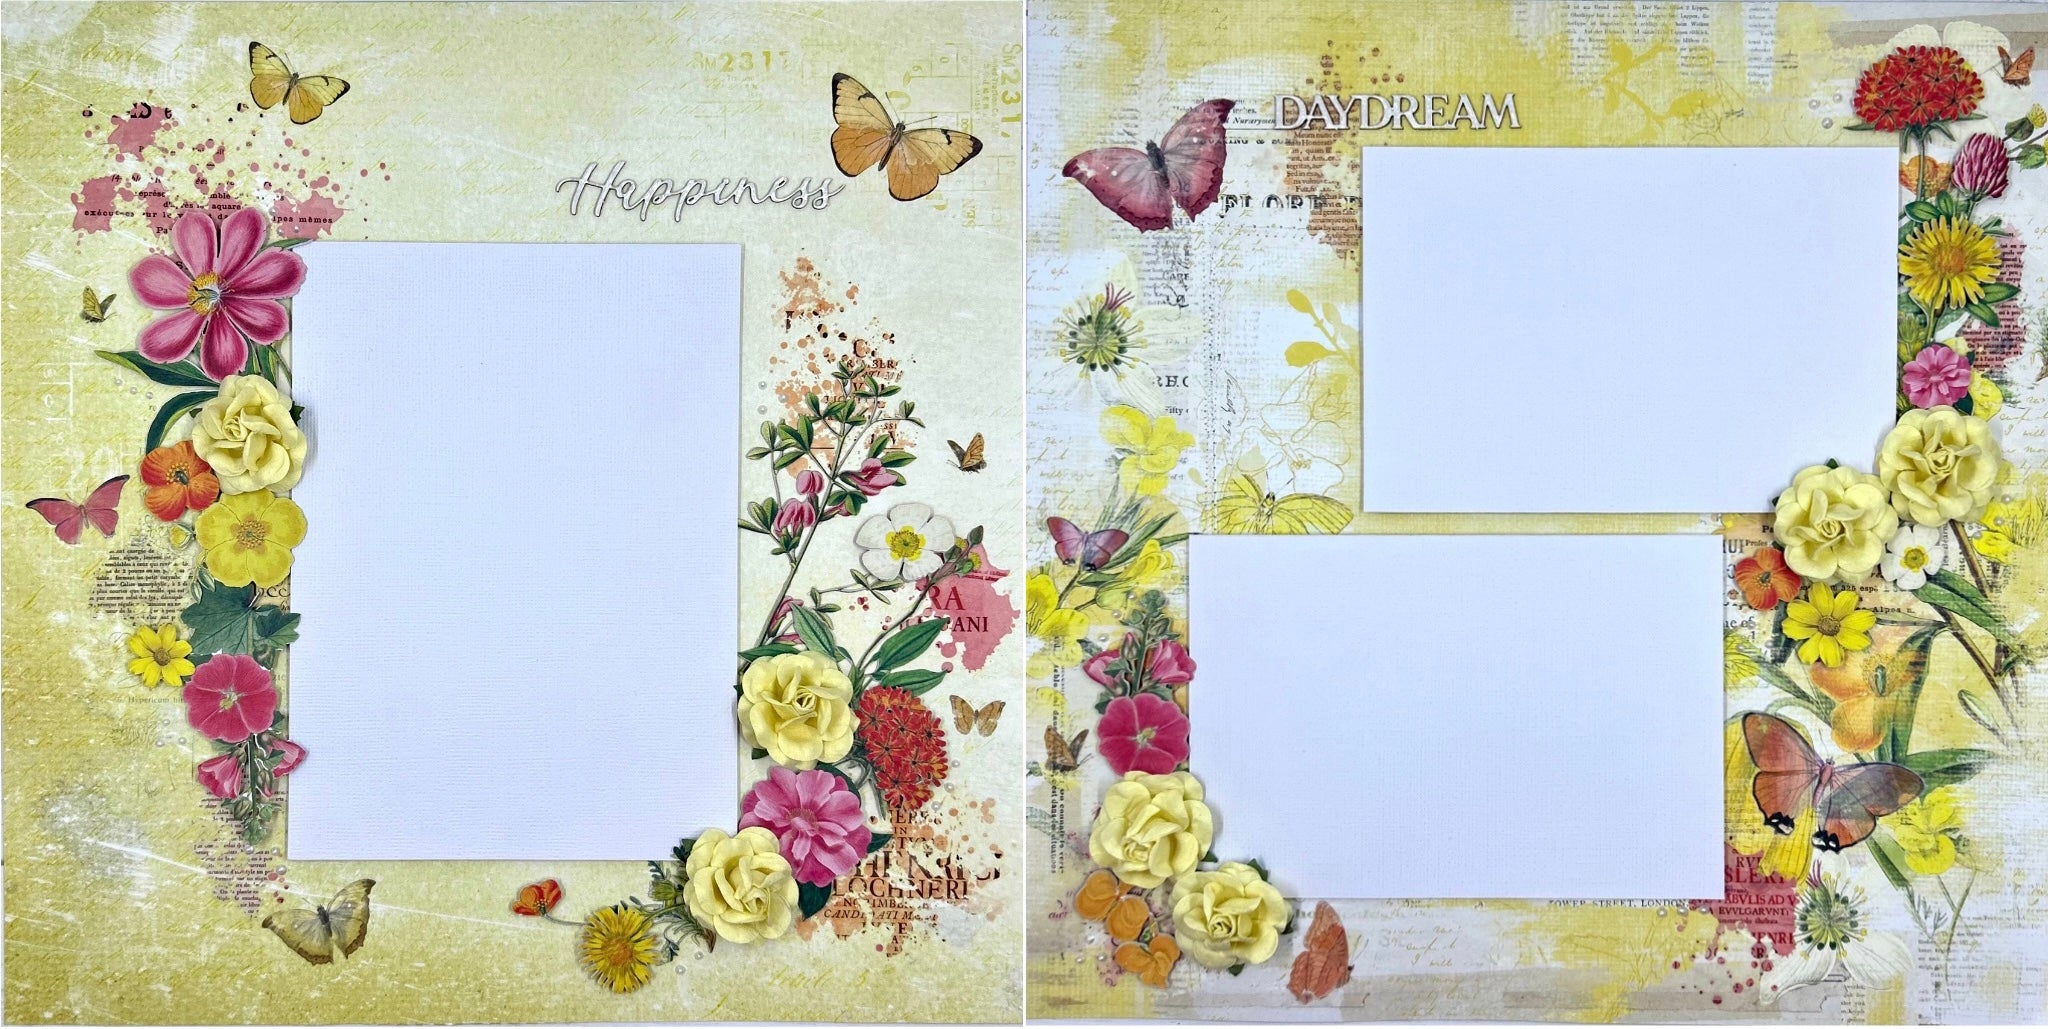 Springtime Daydream 2-Page Layout